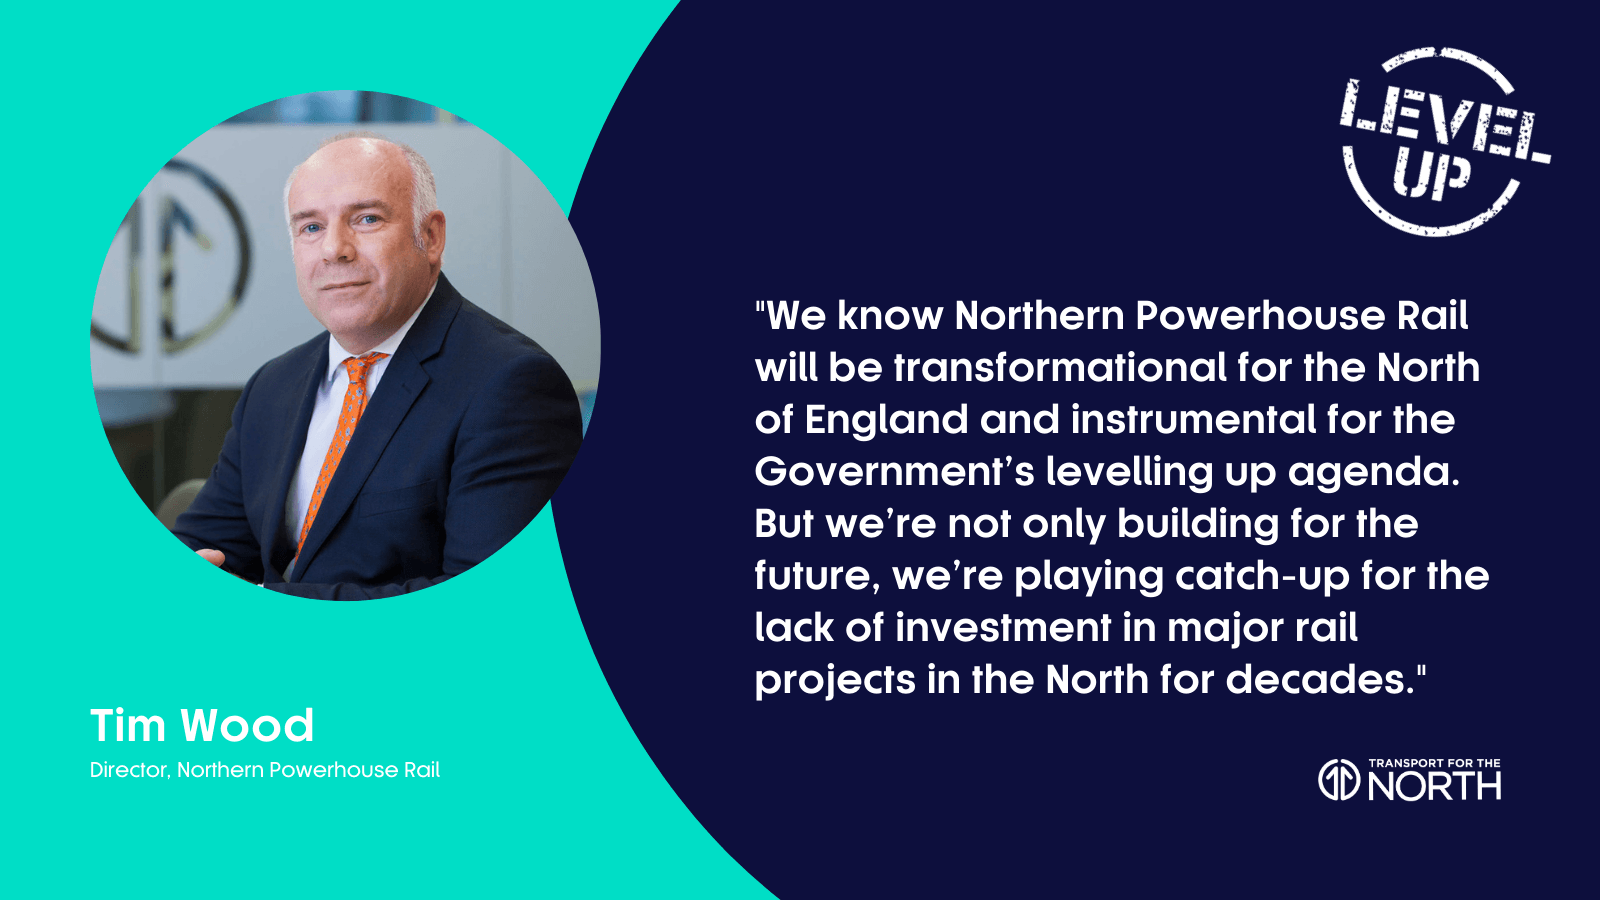 Tim Wood, Northern Powerhouse Rail Director at Transport for the North